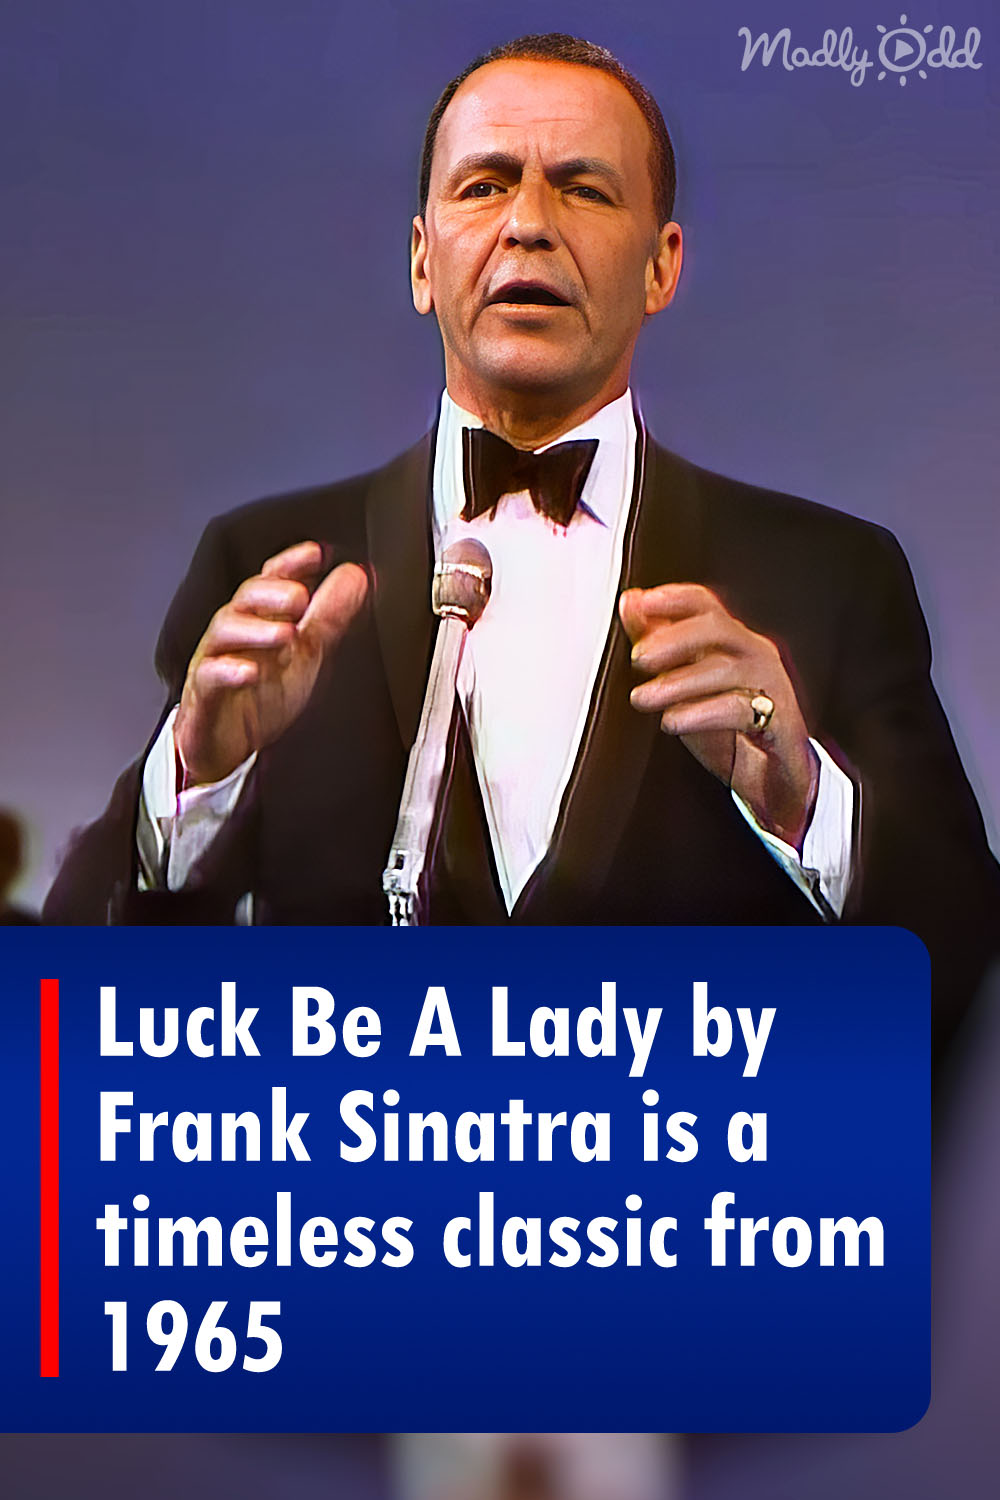 Luck Be A Lady by Frank Sinatra is a timeless classic from 1965